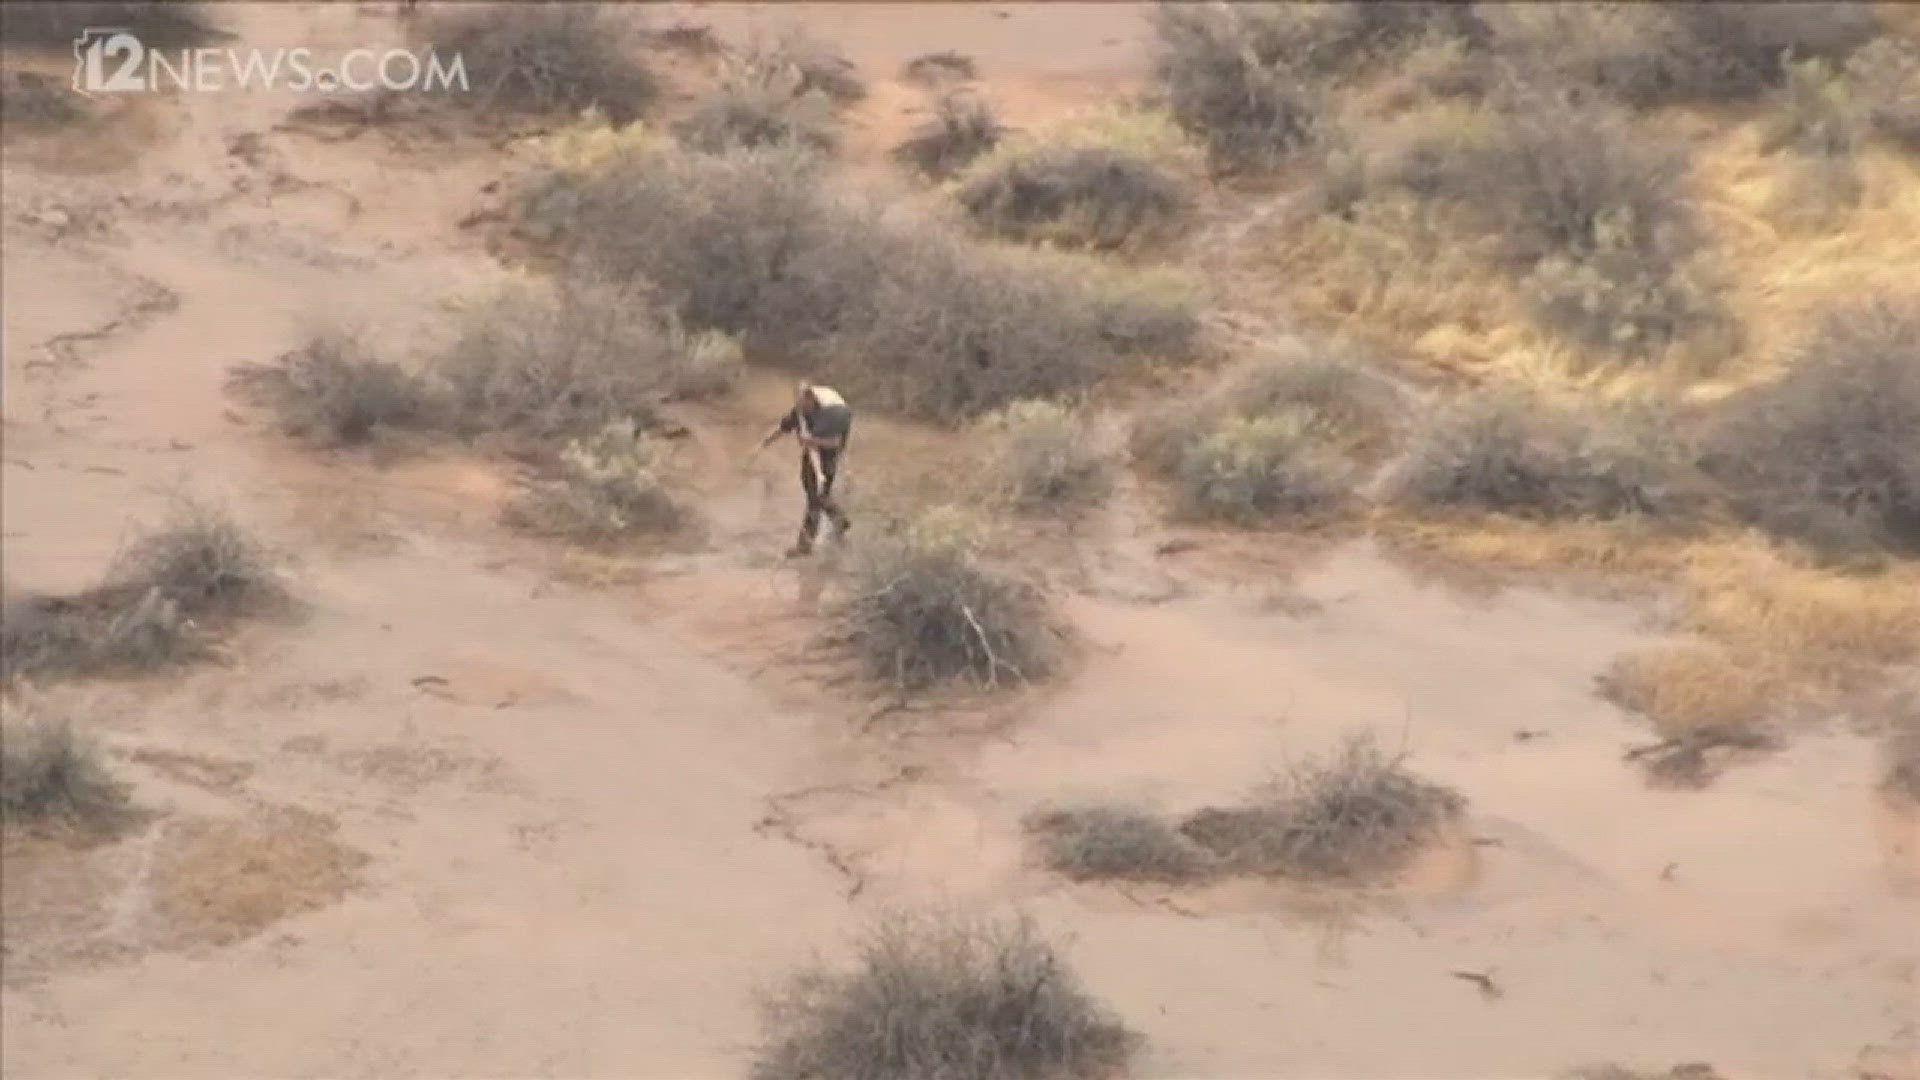 Chopper captured footage of a boy being rescued after being trapped by the monsoon floods in Mesa.